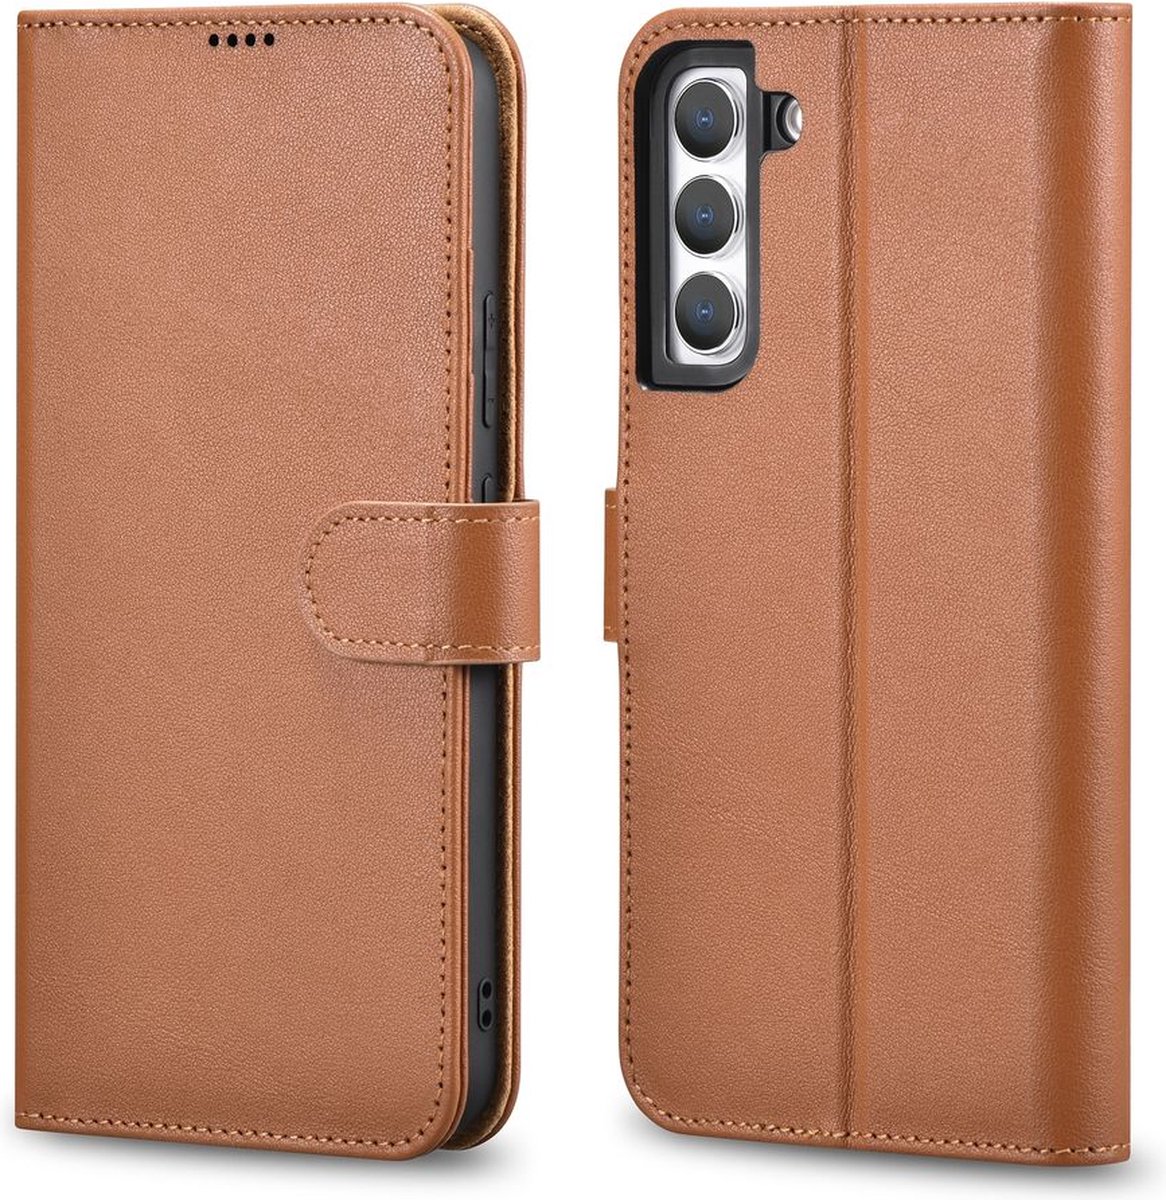 iCarer Leather Boekmodel Hoes Samsung Galaxy S22 - Bruin